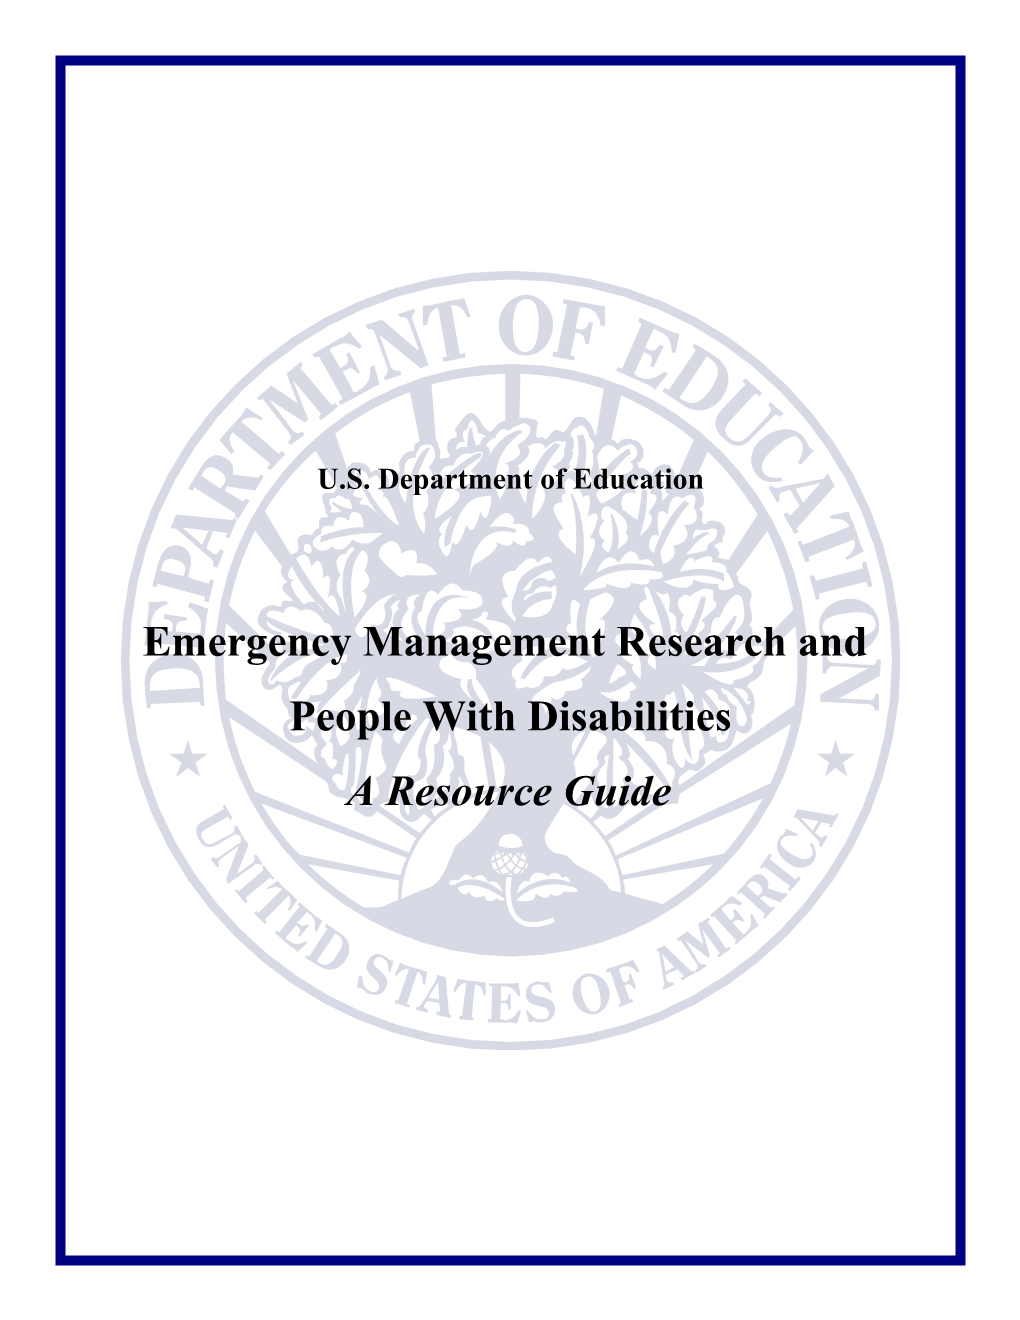 Emergency Management Research and People with Disabilities: a Resource Guide (MS Word)